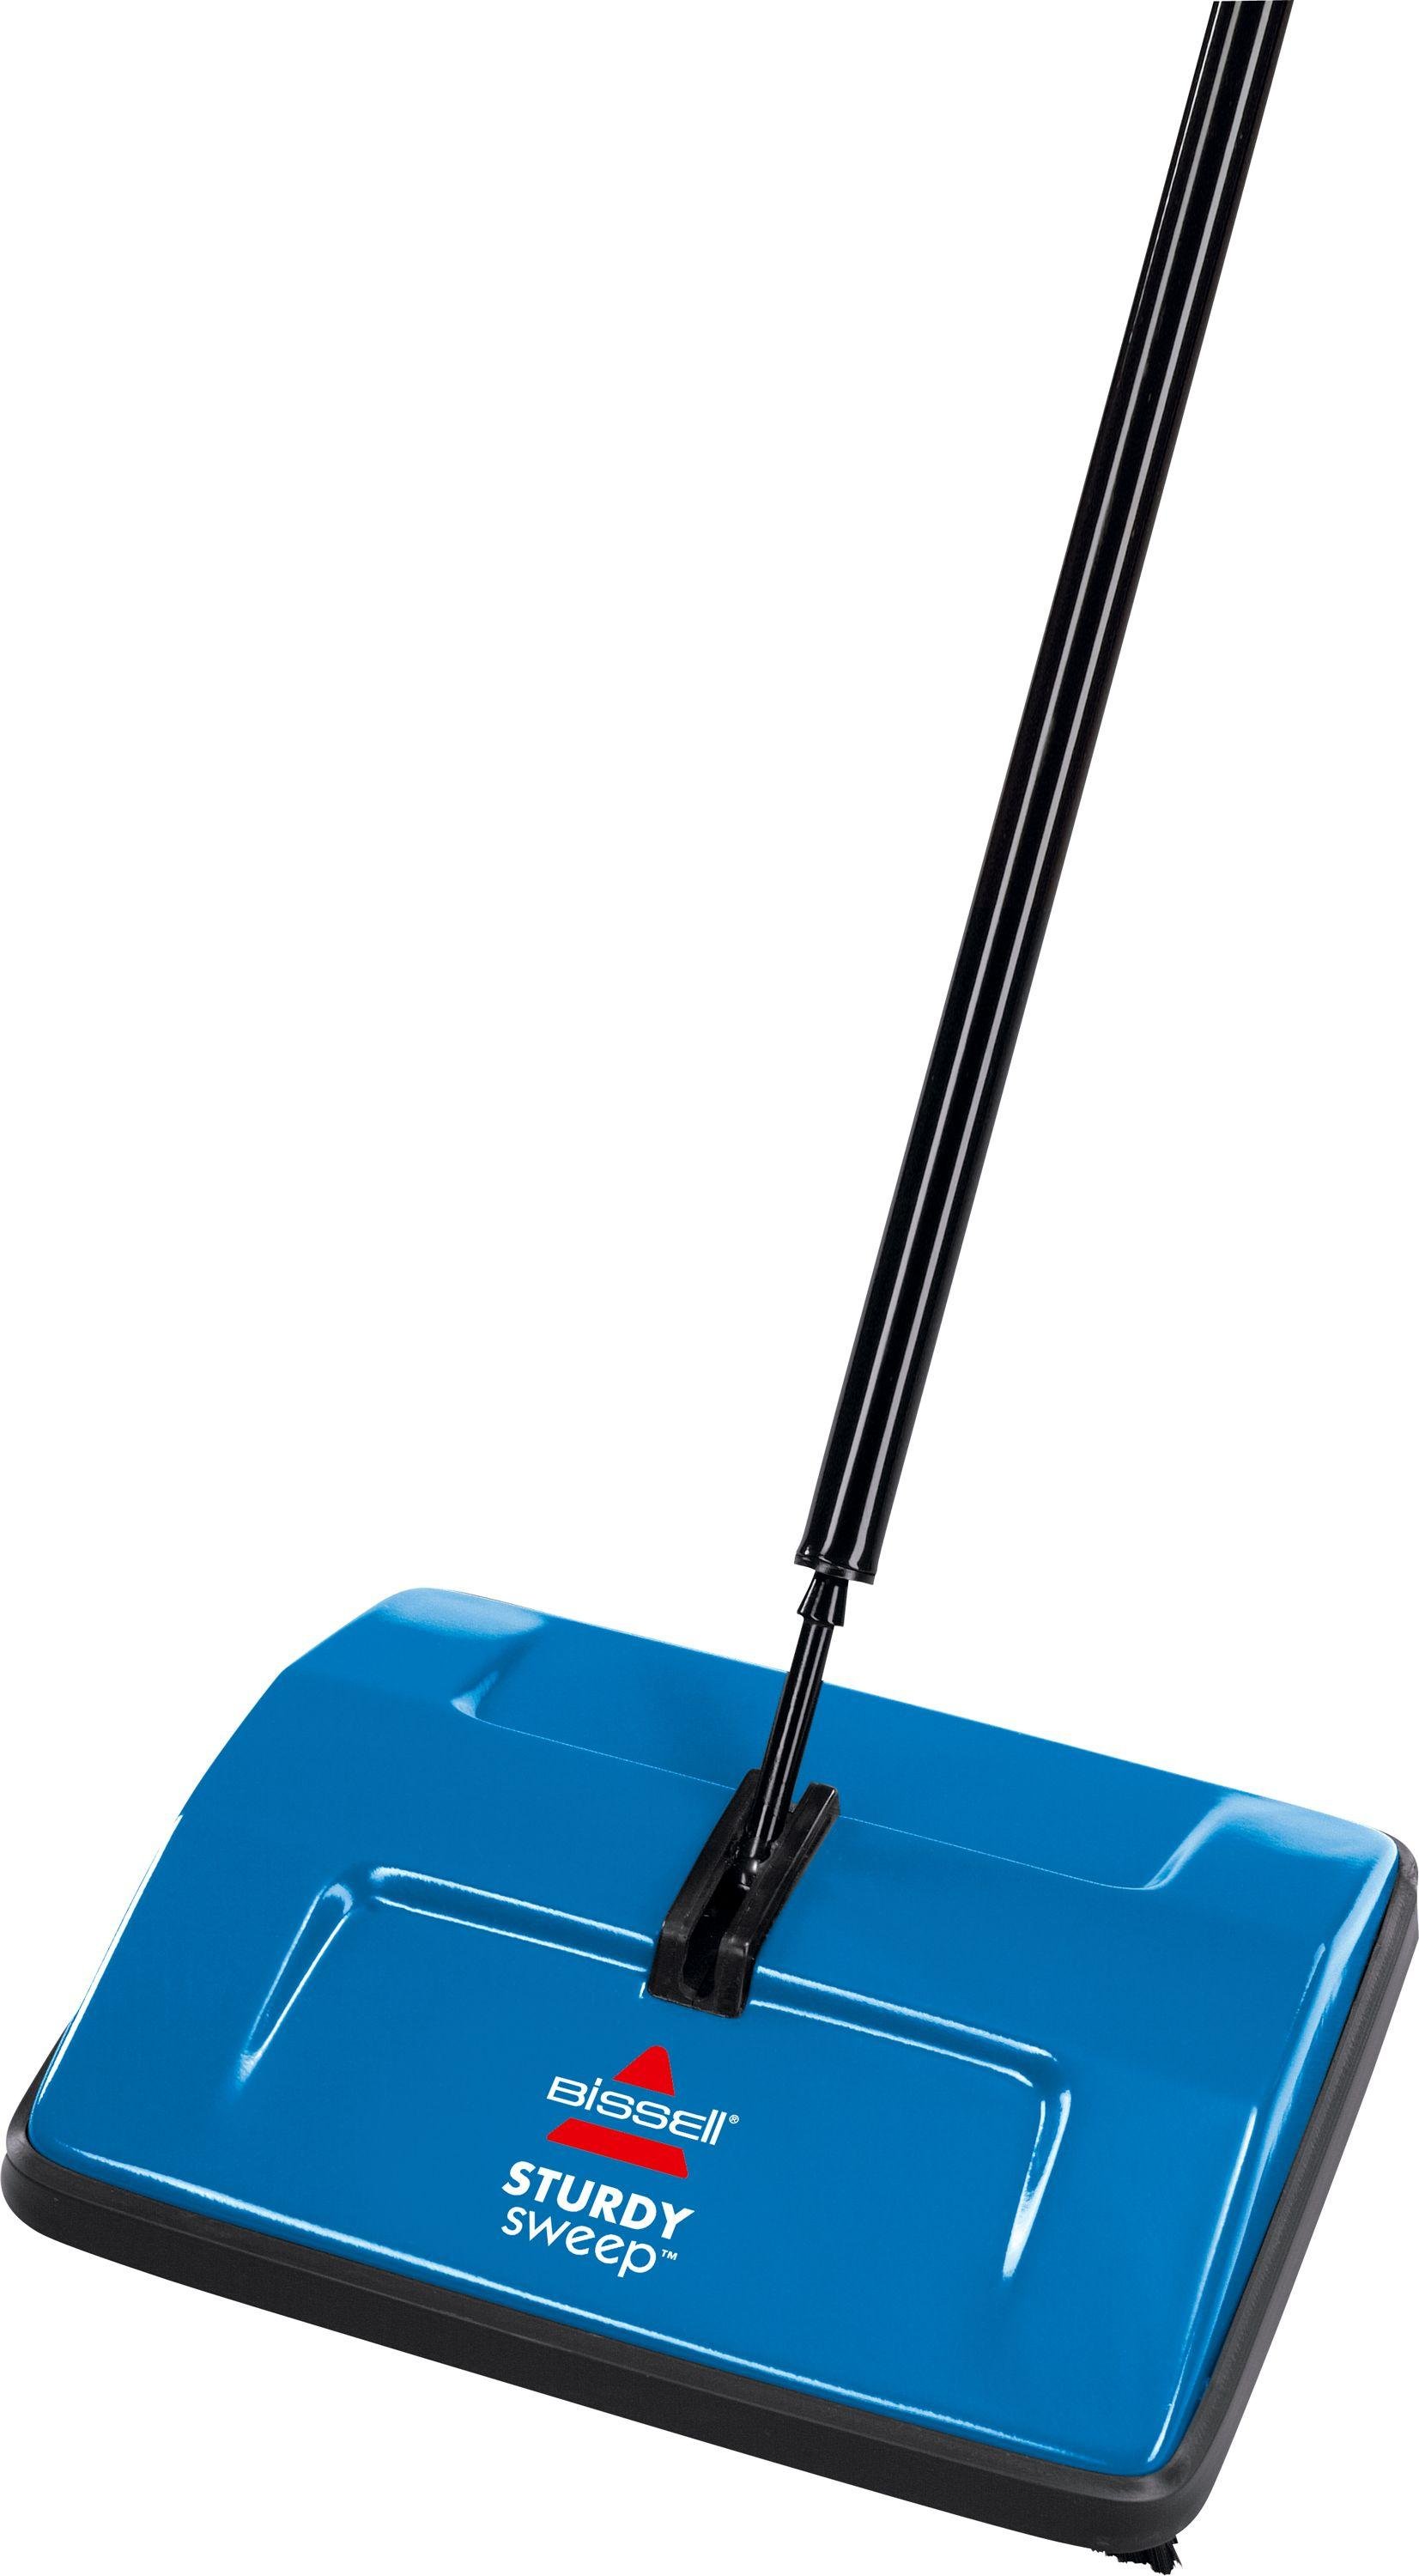 Bissell 2314E Sturdy Sweep Manual Floor Sweeper Review